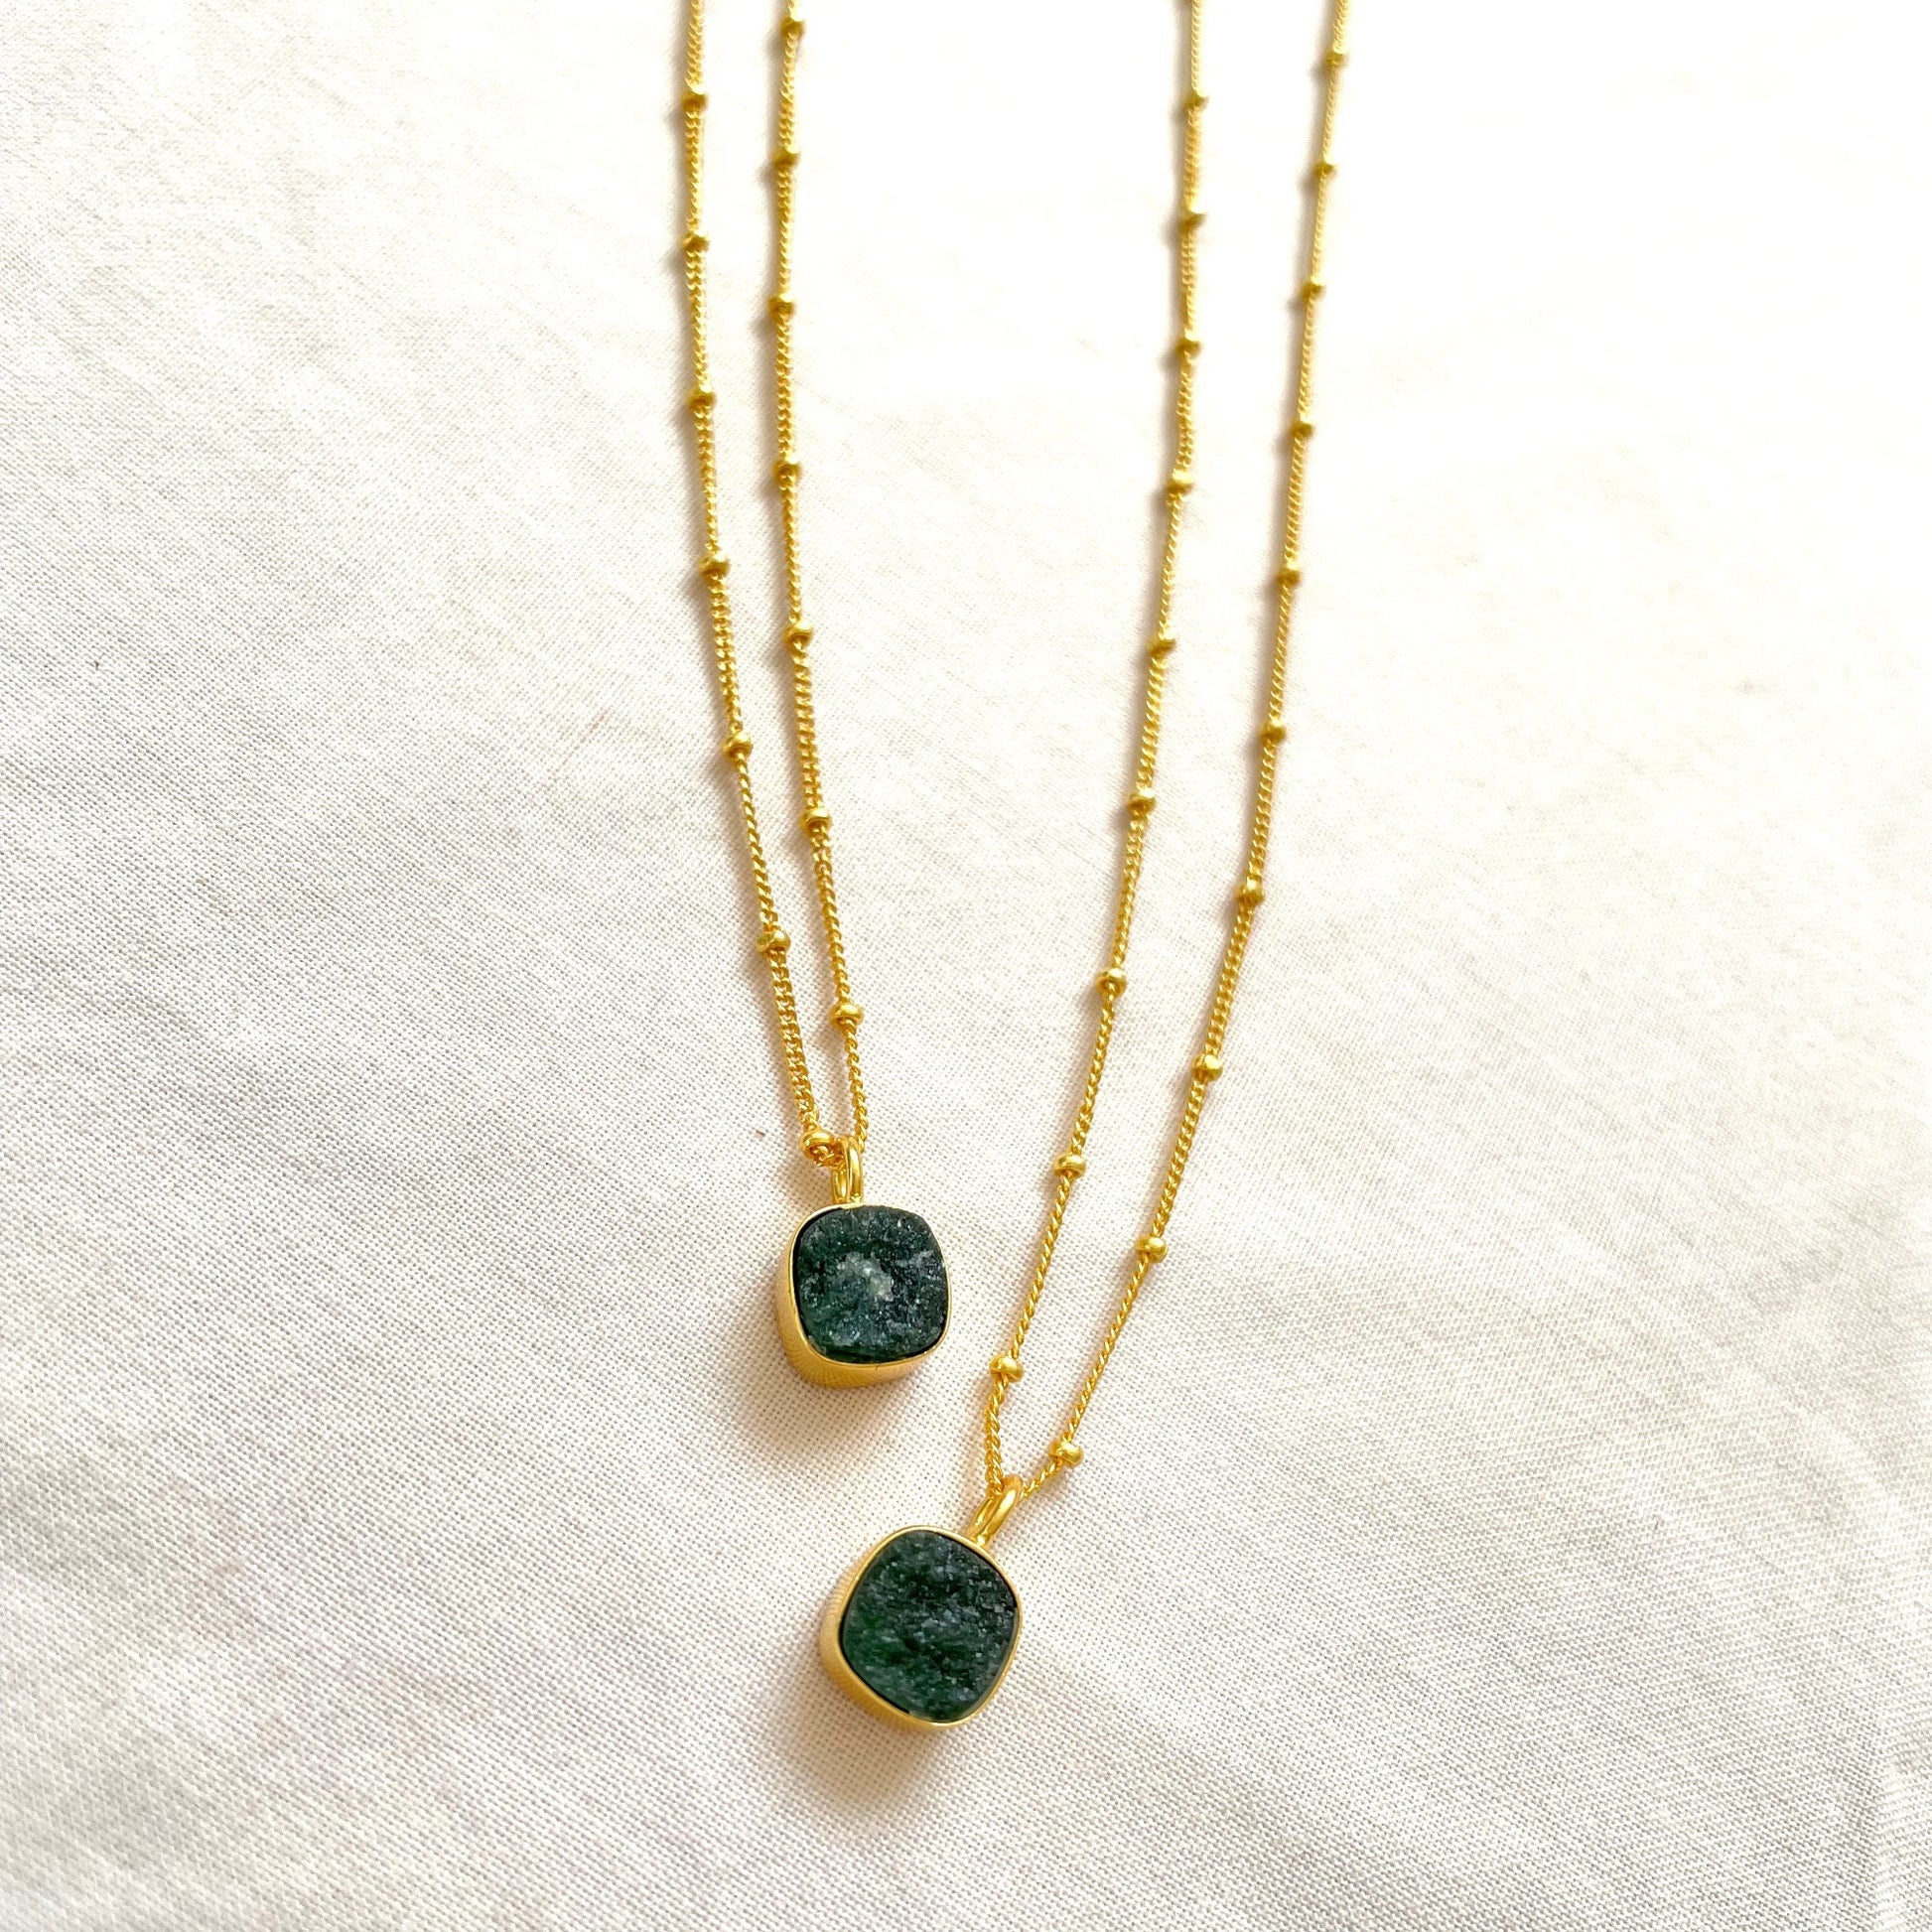 Green Avenurine Necklace, Gold Plated on 925 Sterling Silver, handmade gemstone necklace by Brinda, Unique Gift for her, Unique necklace, gemstones, gold, chain, Crystal, trending, mothers day gift, small business, london, dainty necklace, Square